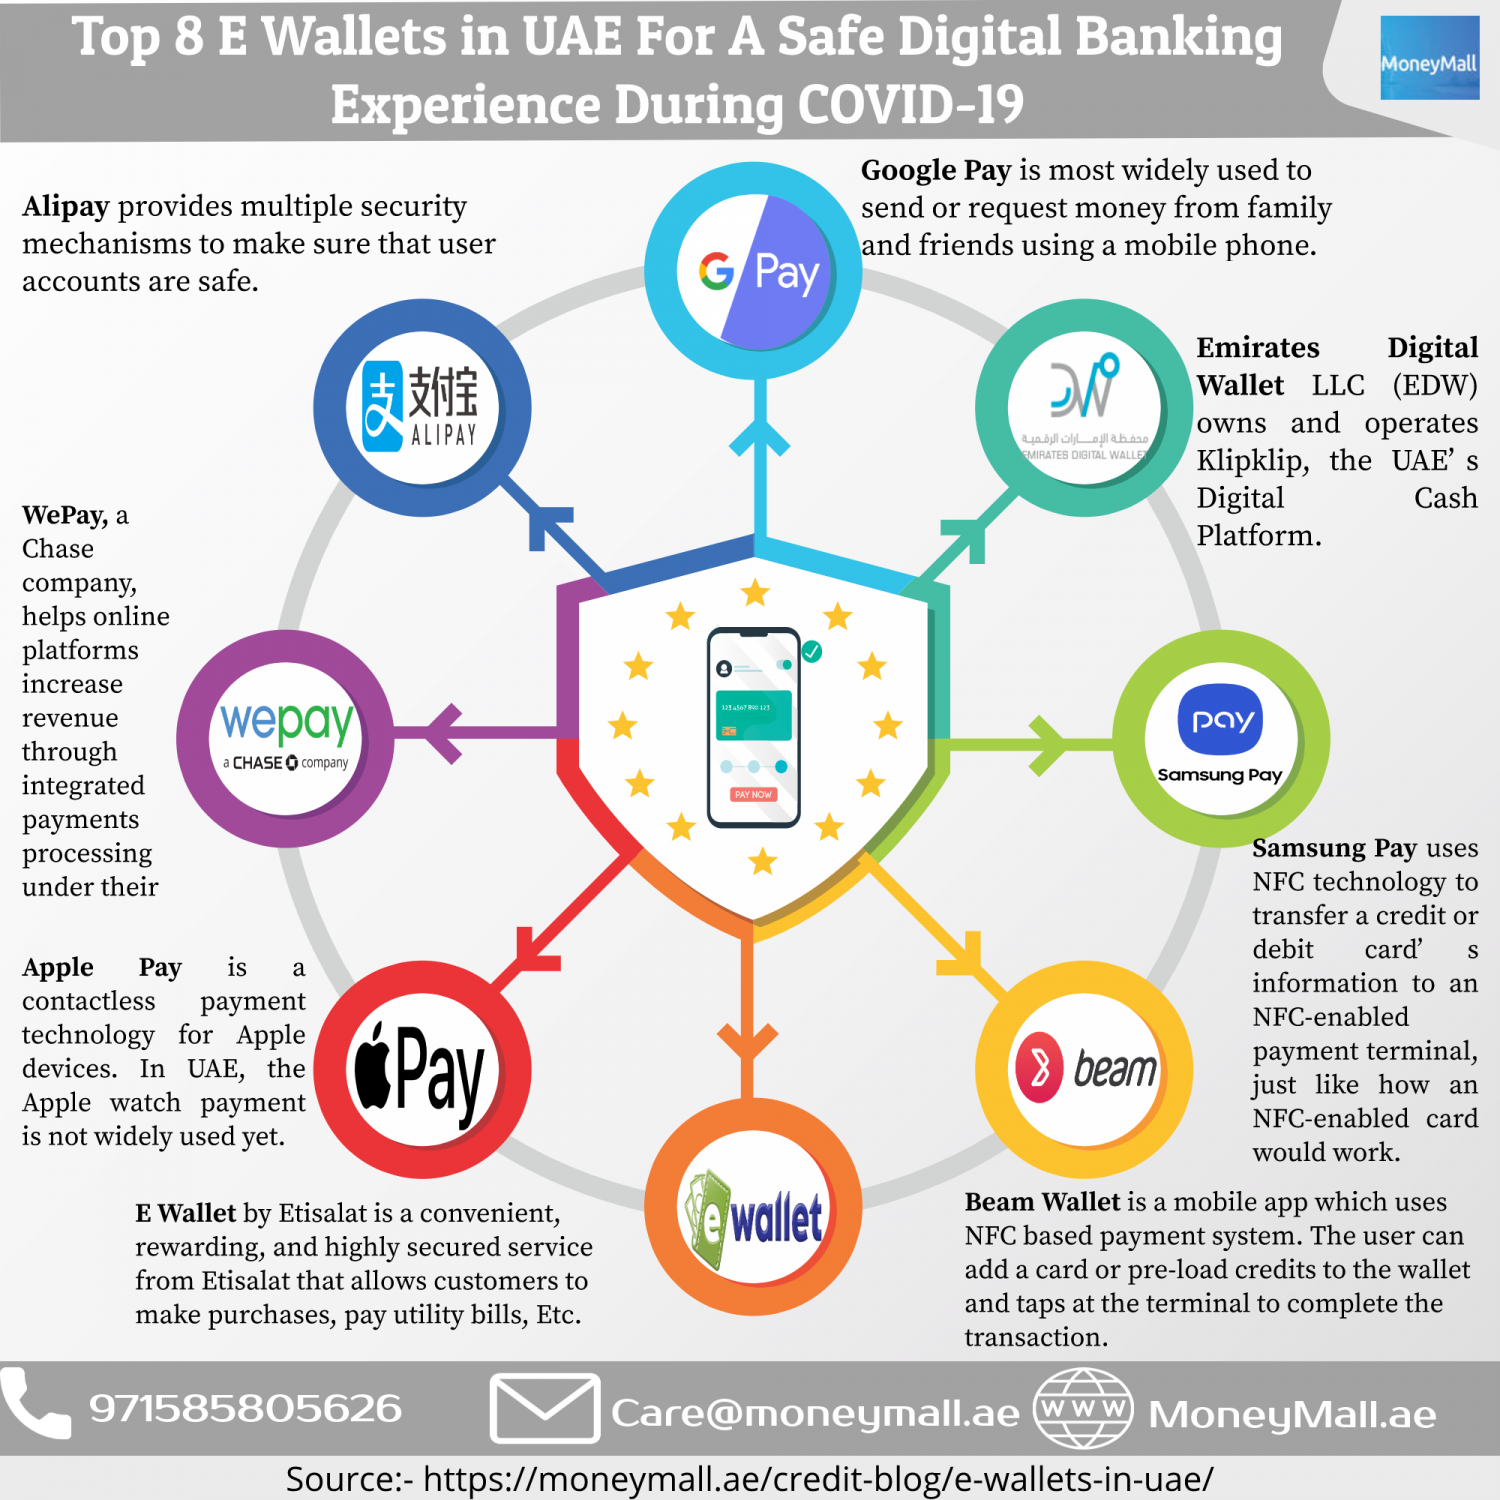 Top 8 E-Wallets in UAE For A Safe Digital Banking Experience During COVID-19 Infographic